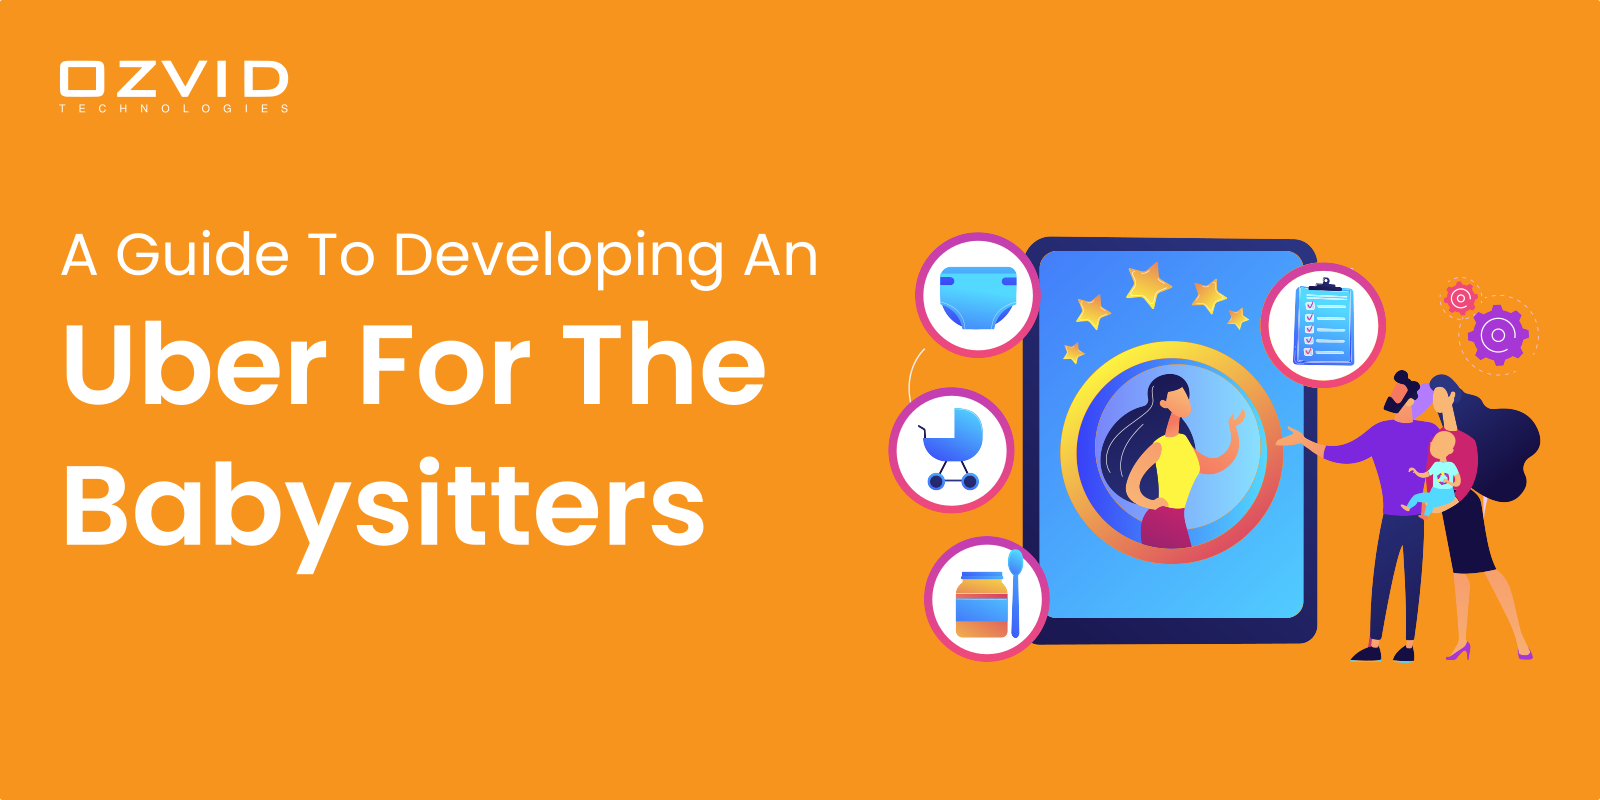 A Guide To Developing An Uber For The Babysitters